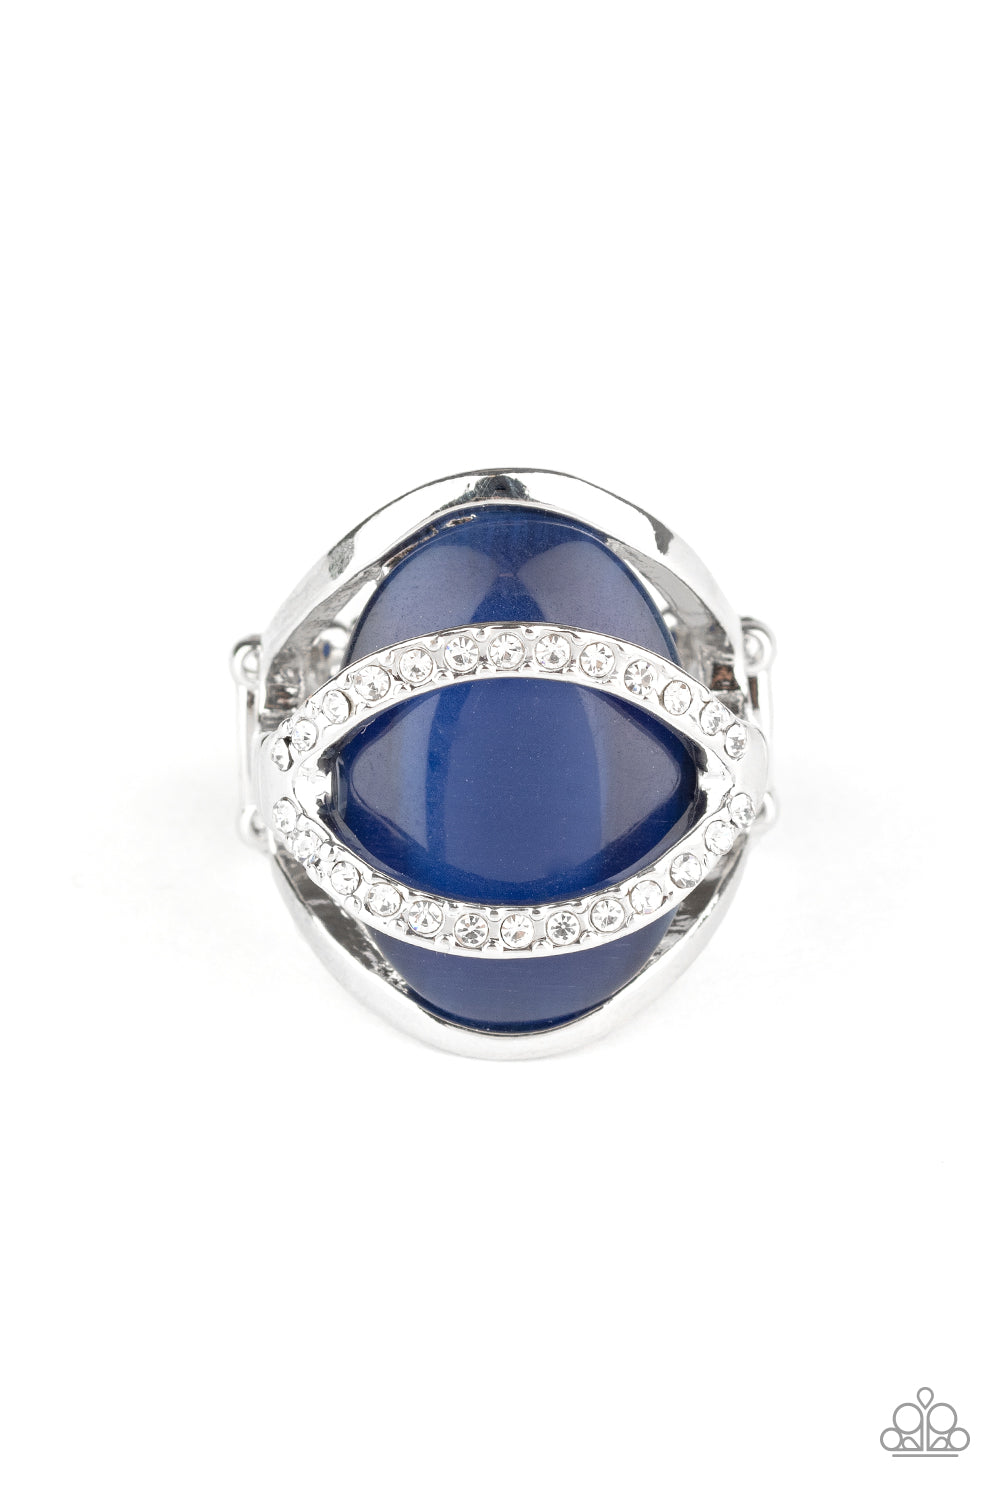 Paparazzi Life of the Party November 2020 Exclusive - Endless Enchantment Blue Ring